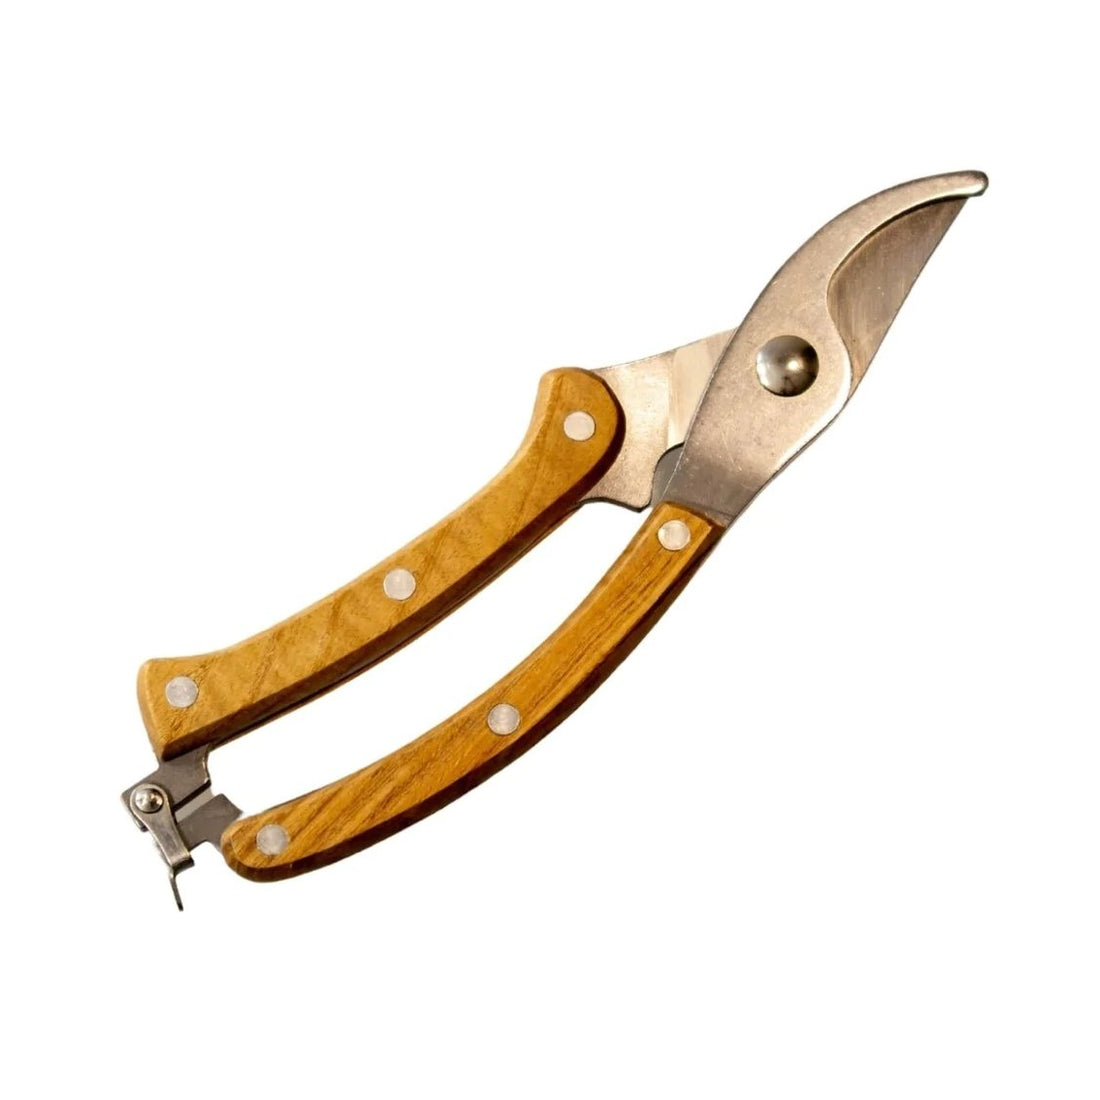 Omni Secateurs - The Flower Crate